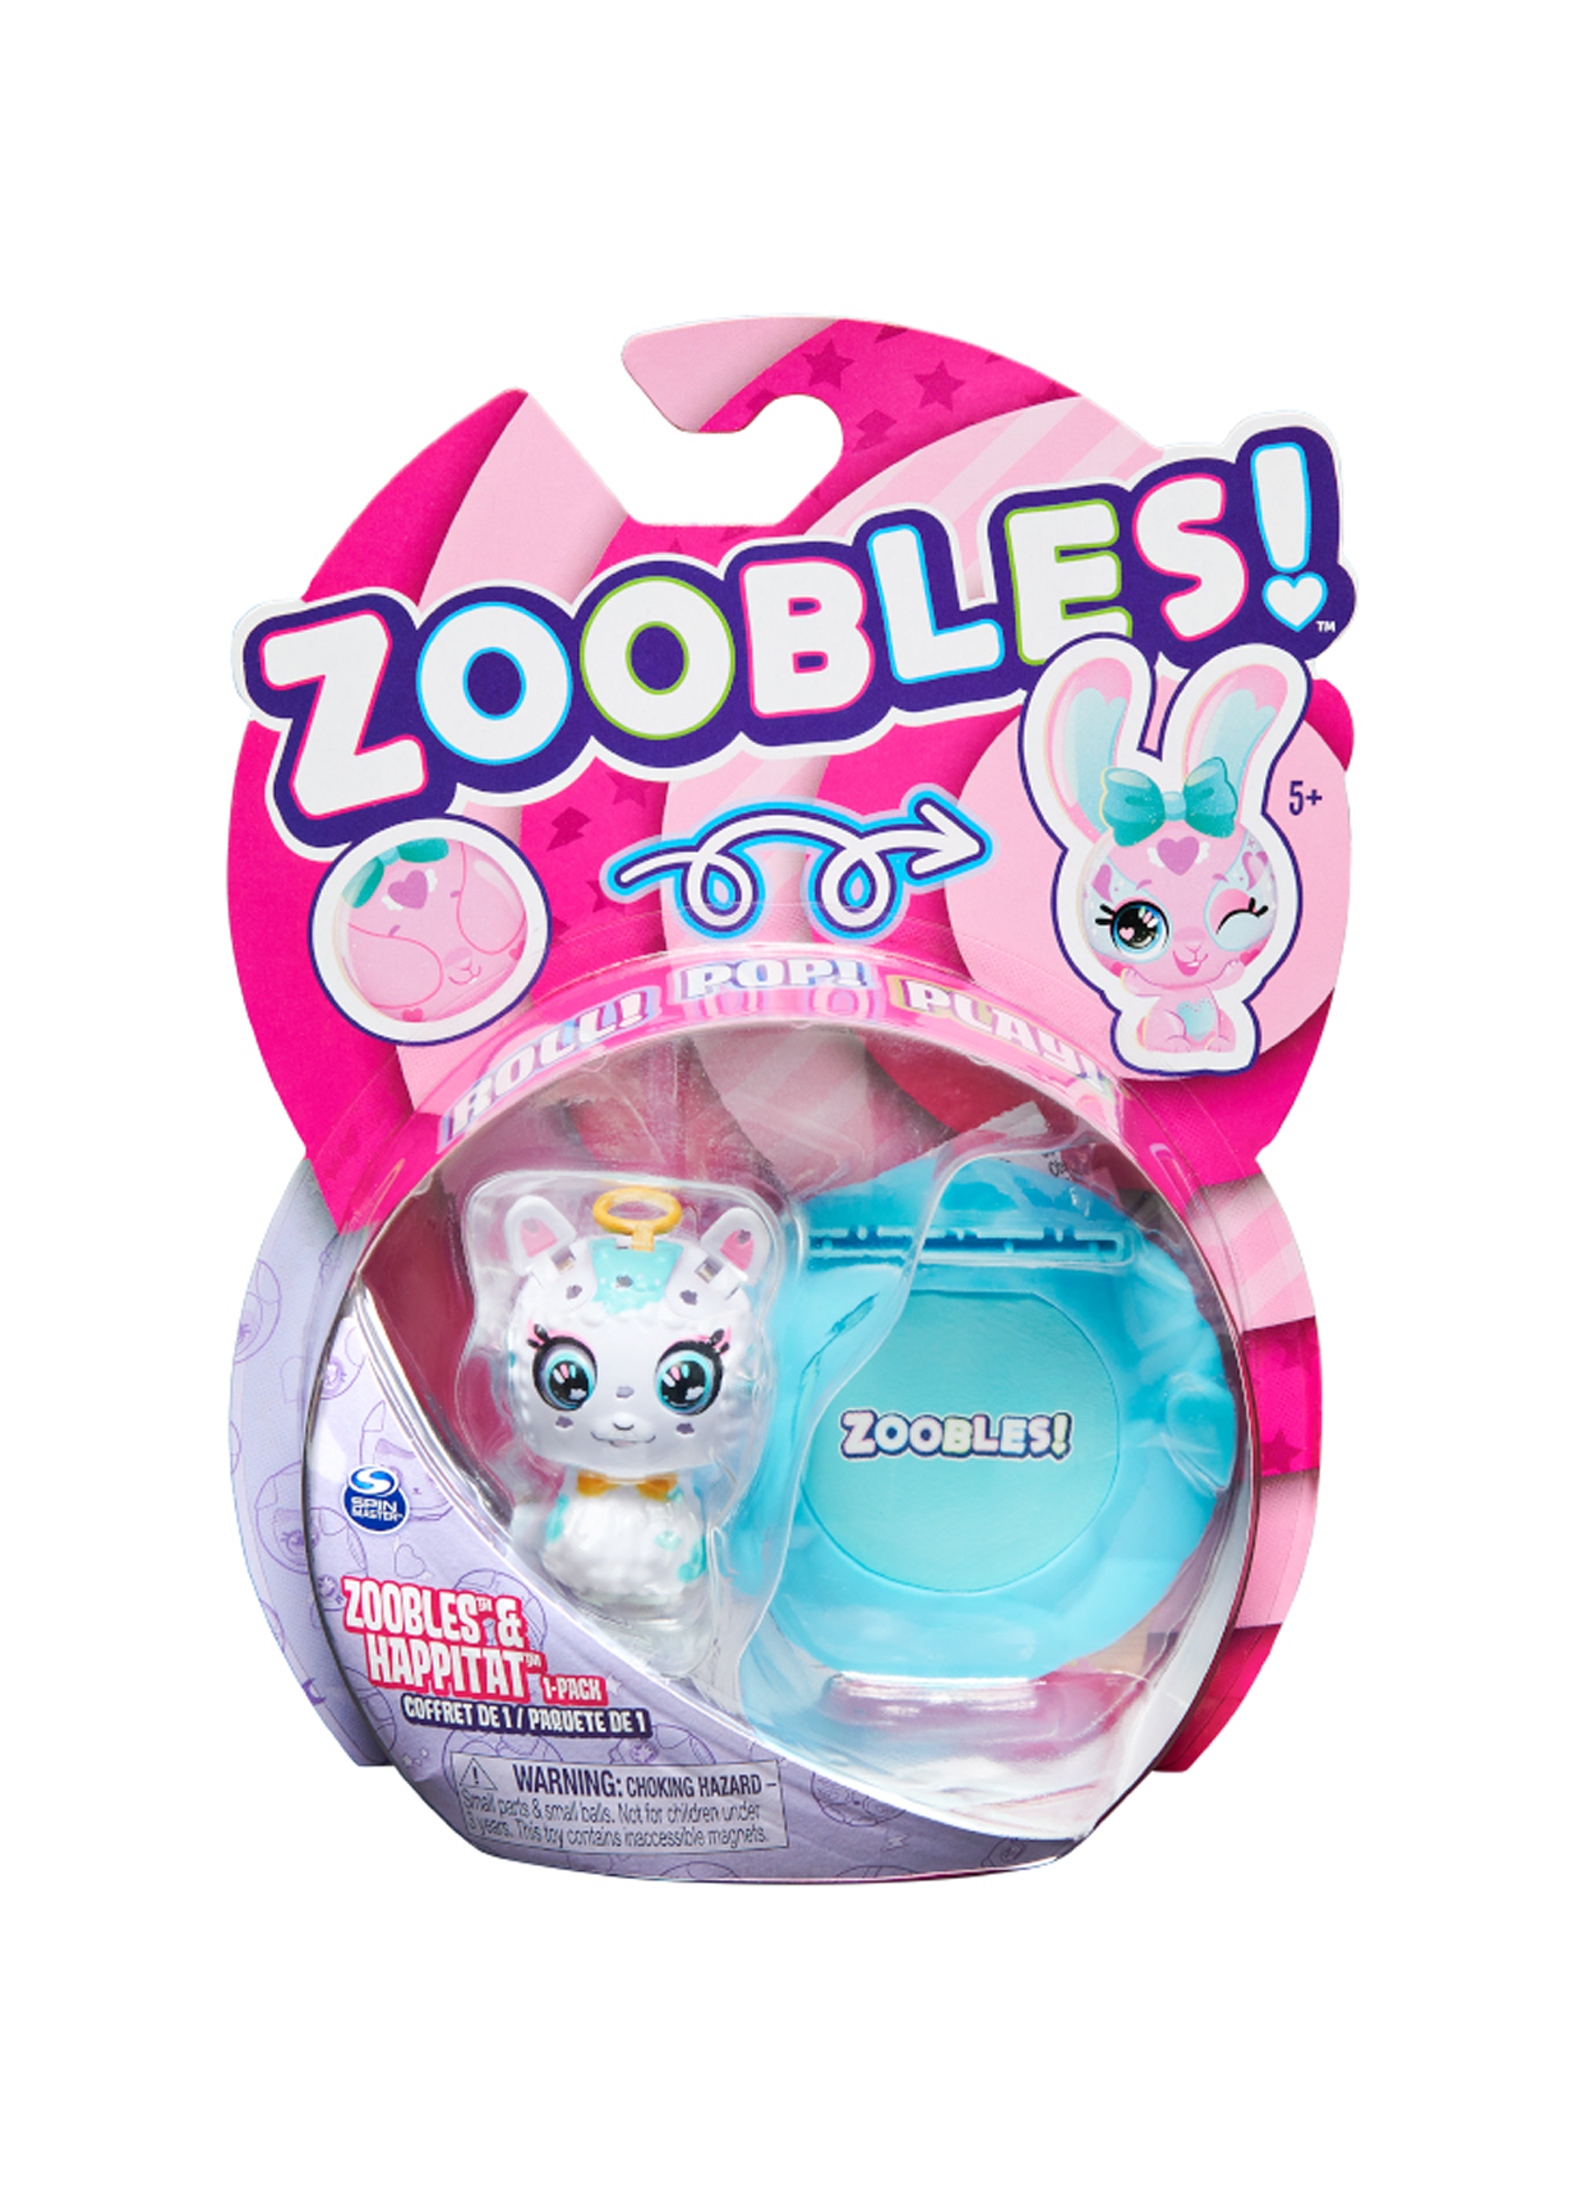 Zoobles - 1 Pack image number 0